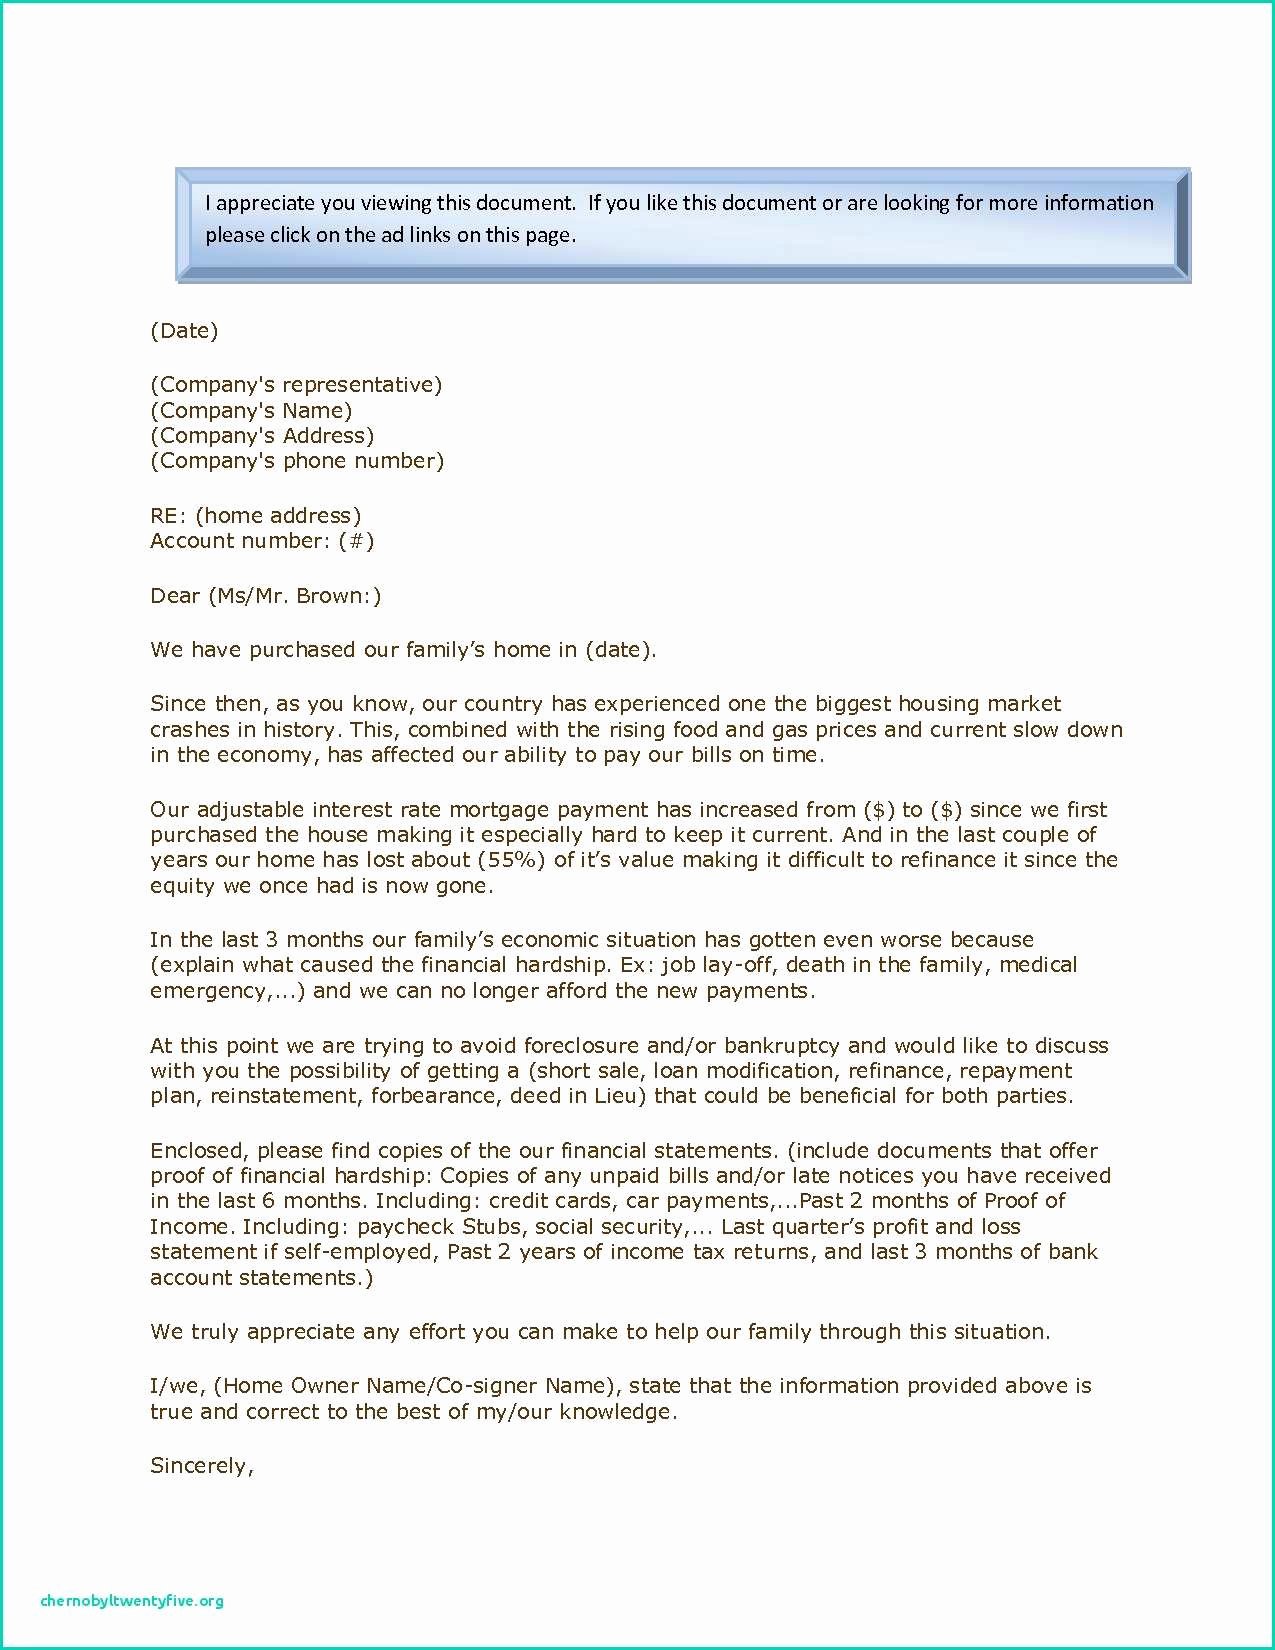 Payment Shock Letter Example Best Of Example Hardship Letter for Mortgage Modification